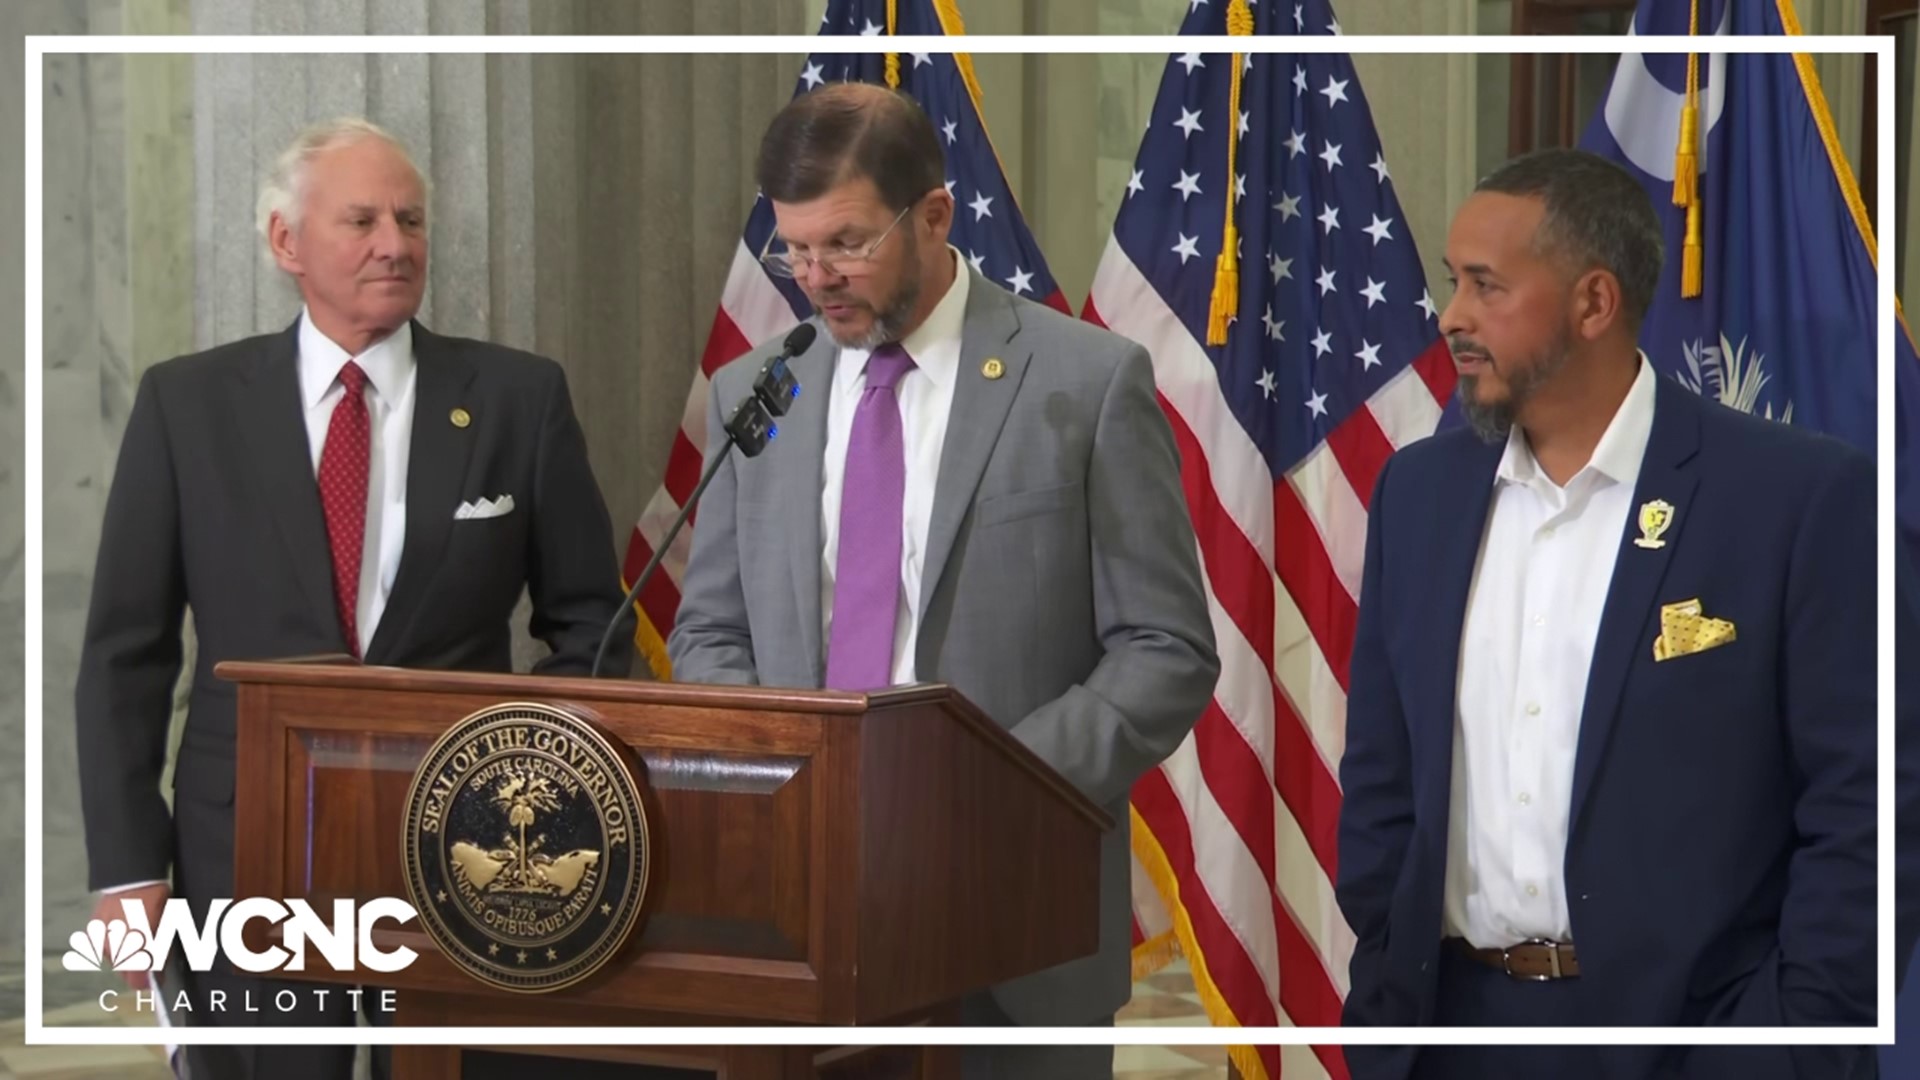 Governor McMaster and the State Department of Veteran's Affairs recognized retired Army First Class Sergeant Alvin King as South Carolina's Veteran of the Year.